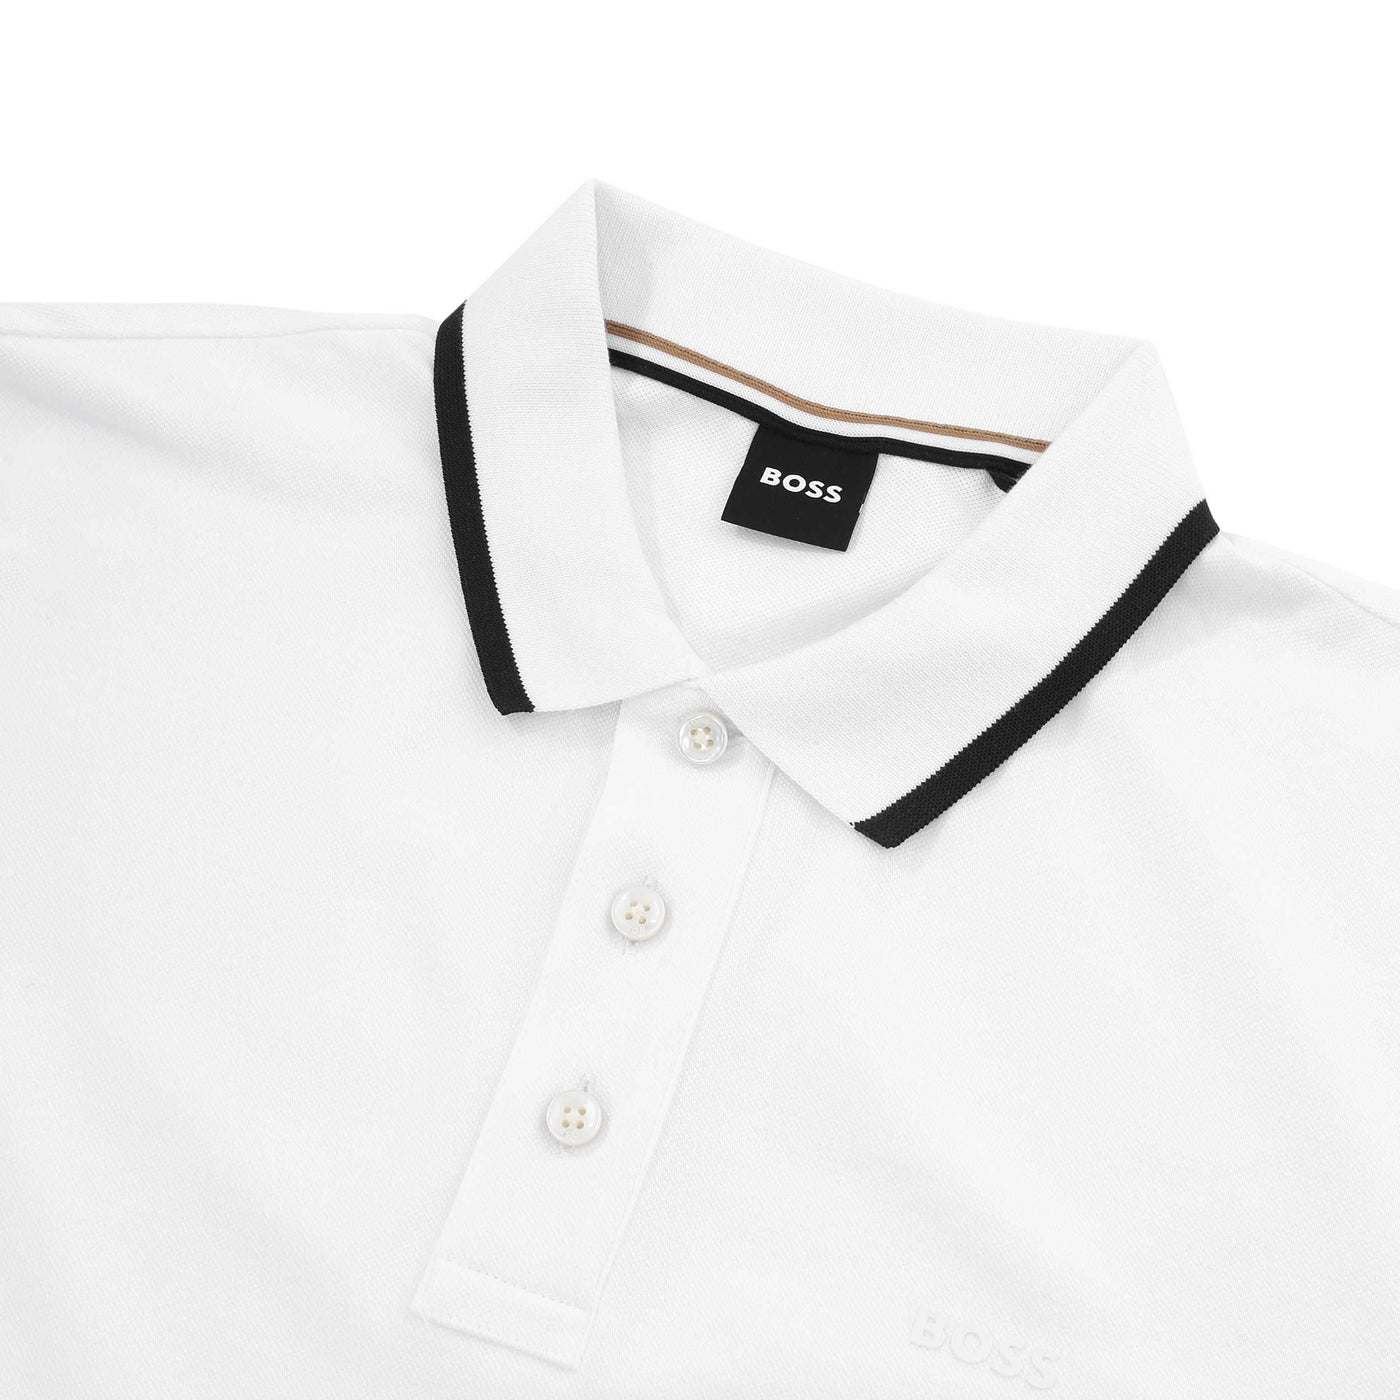 BOSS Parlay 190 Polo Shirt in White Neck